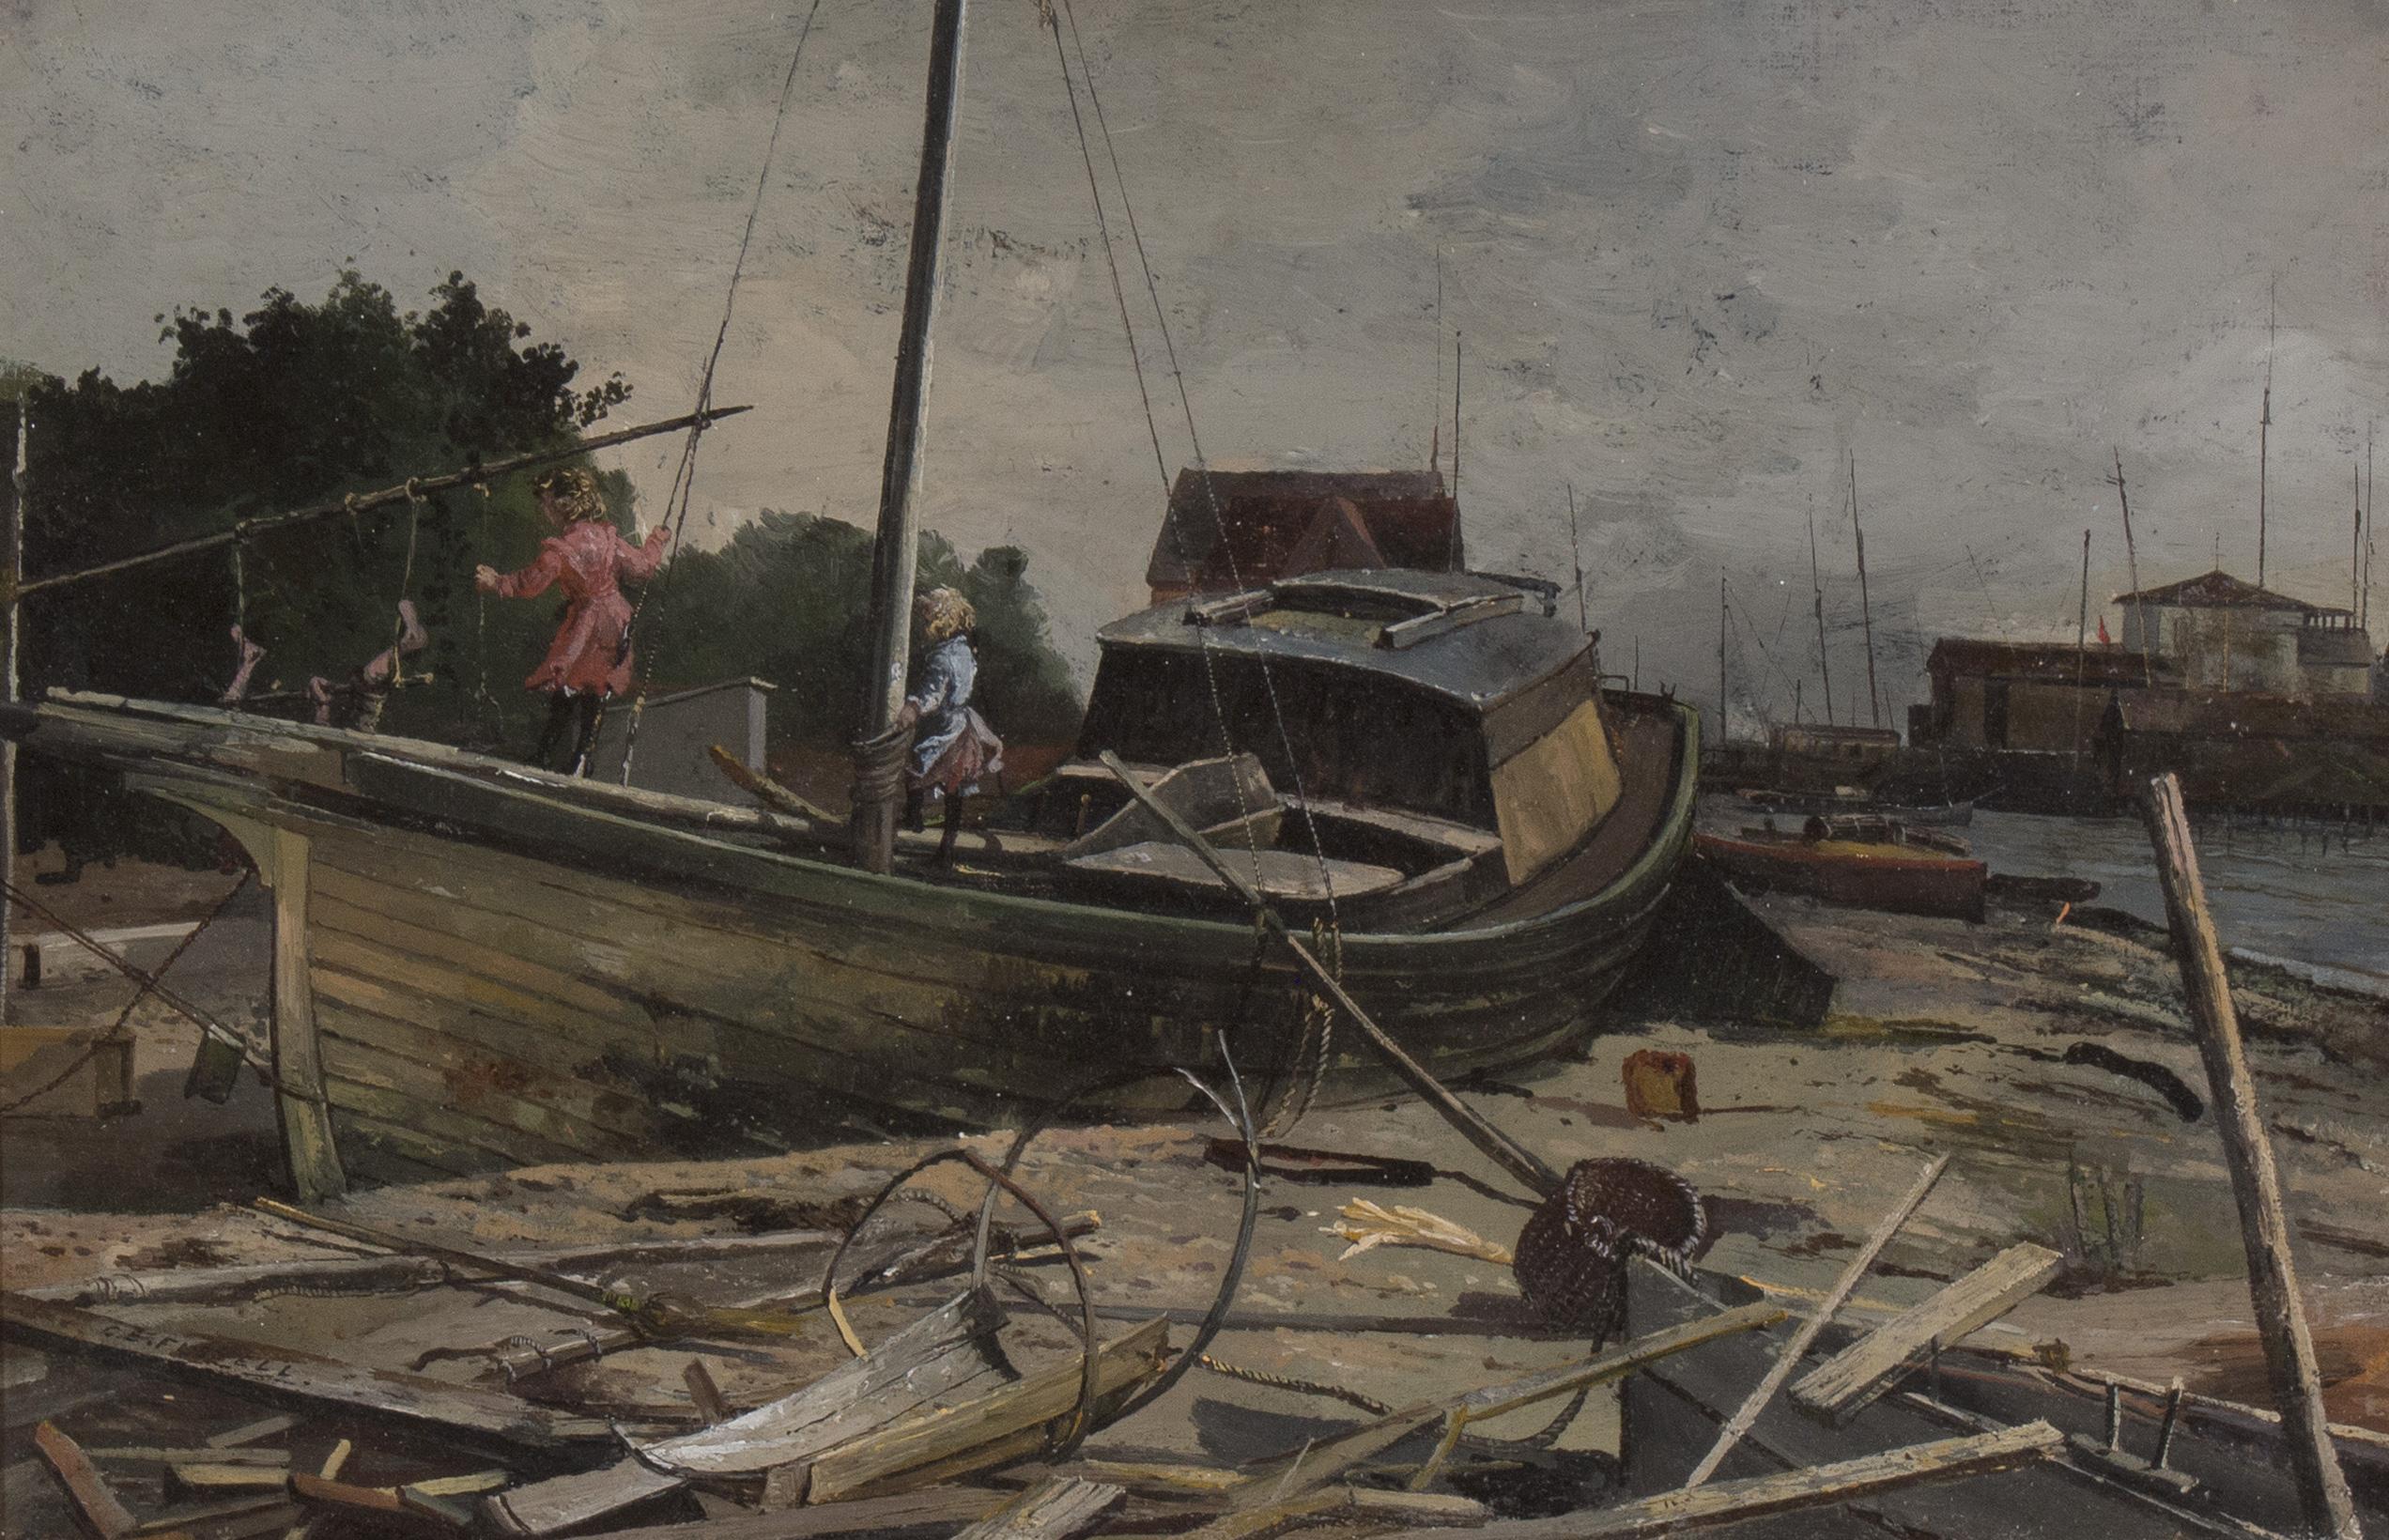 Children Playing on a Boat, likely New York/Brooklyn/Flatbush Area, c. 1895 - Painting by Charles Lewis Fussell